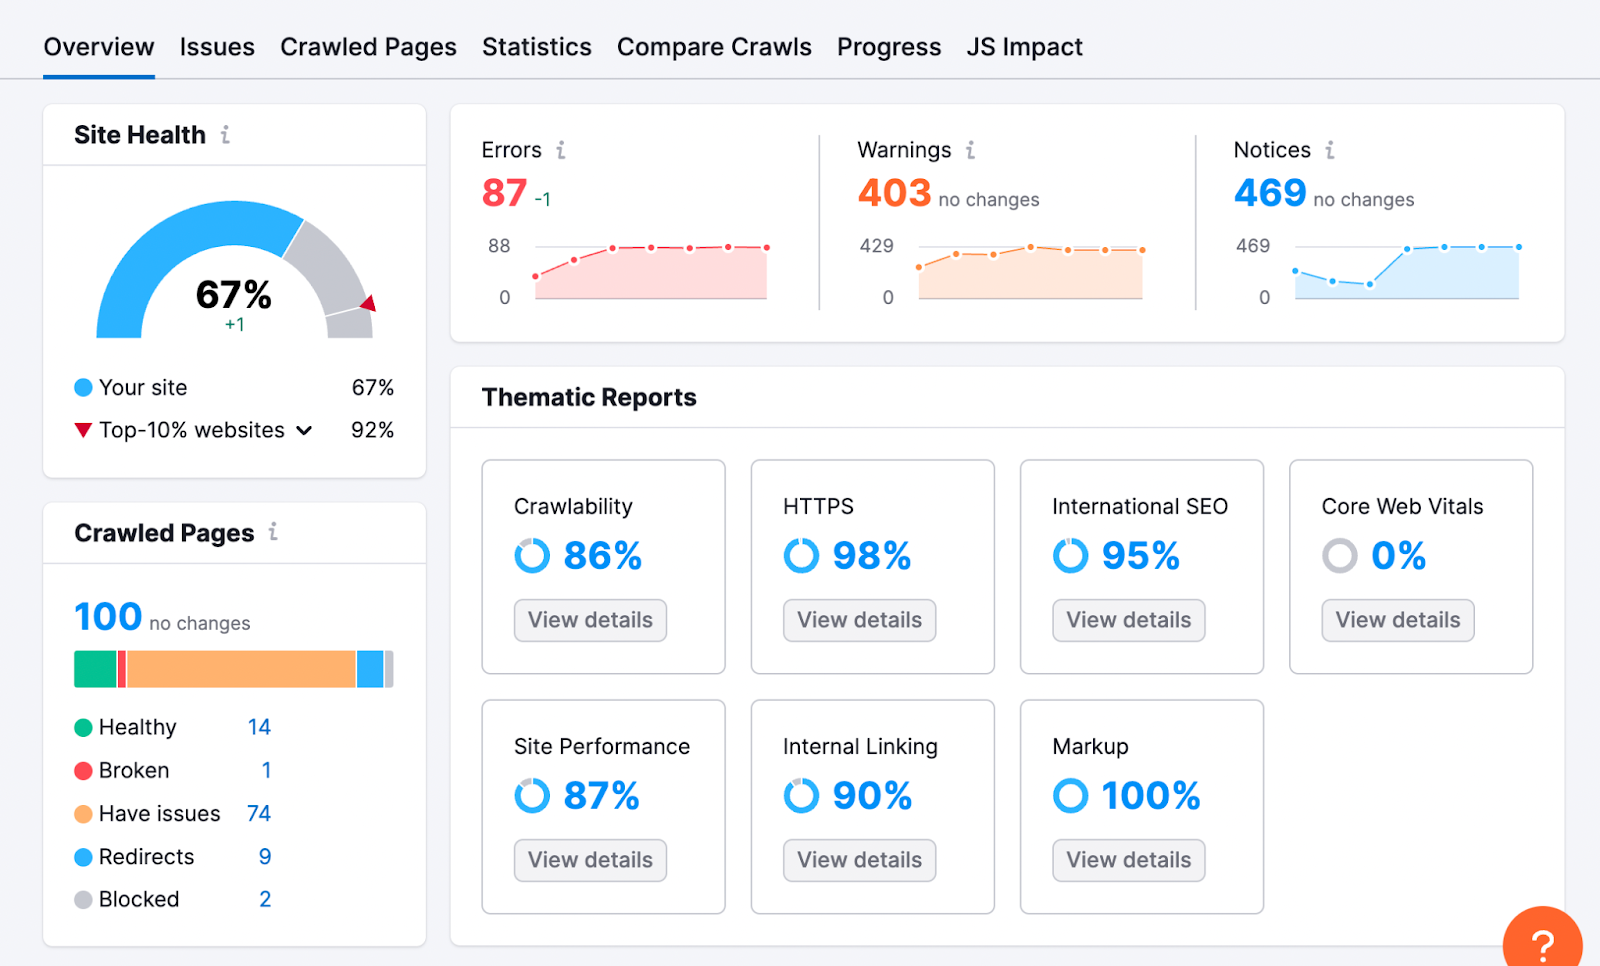 Site Audit's “Overview” dashboard